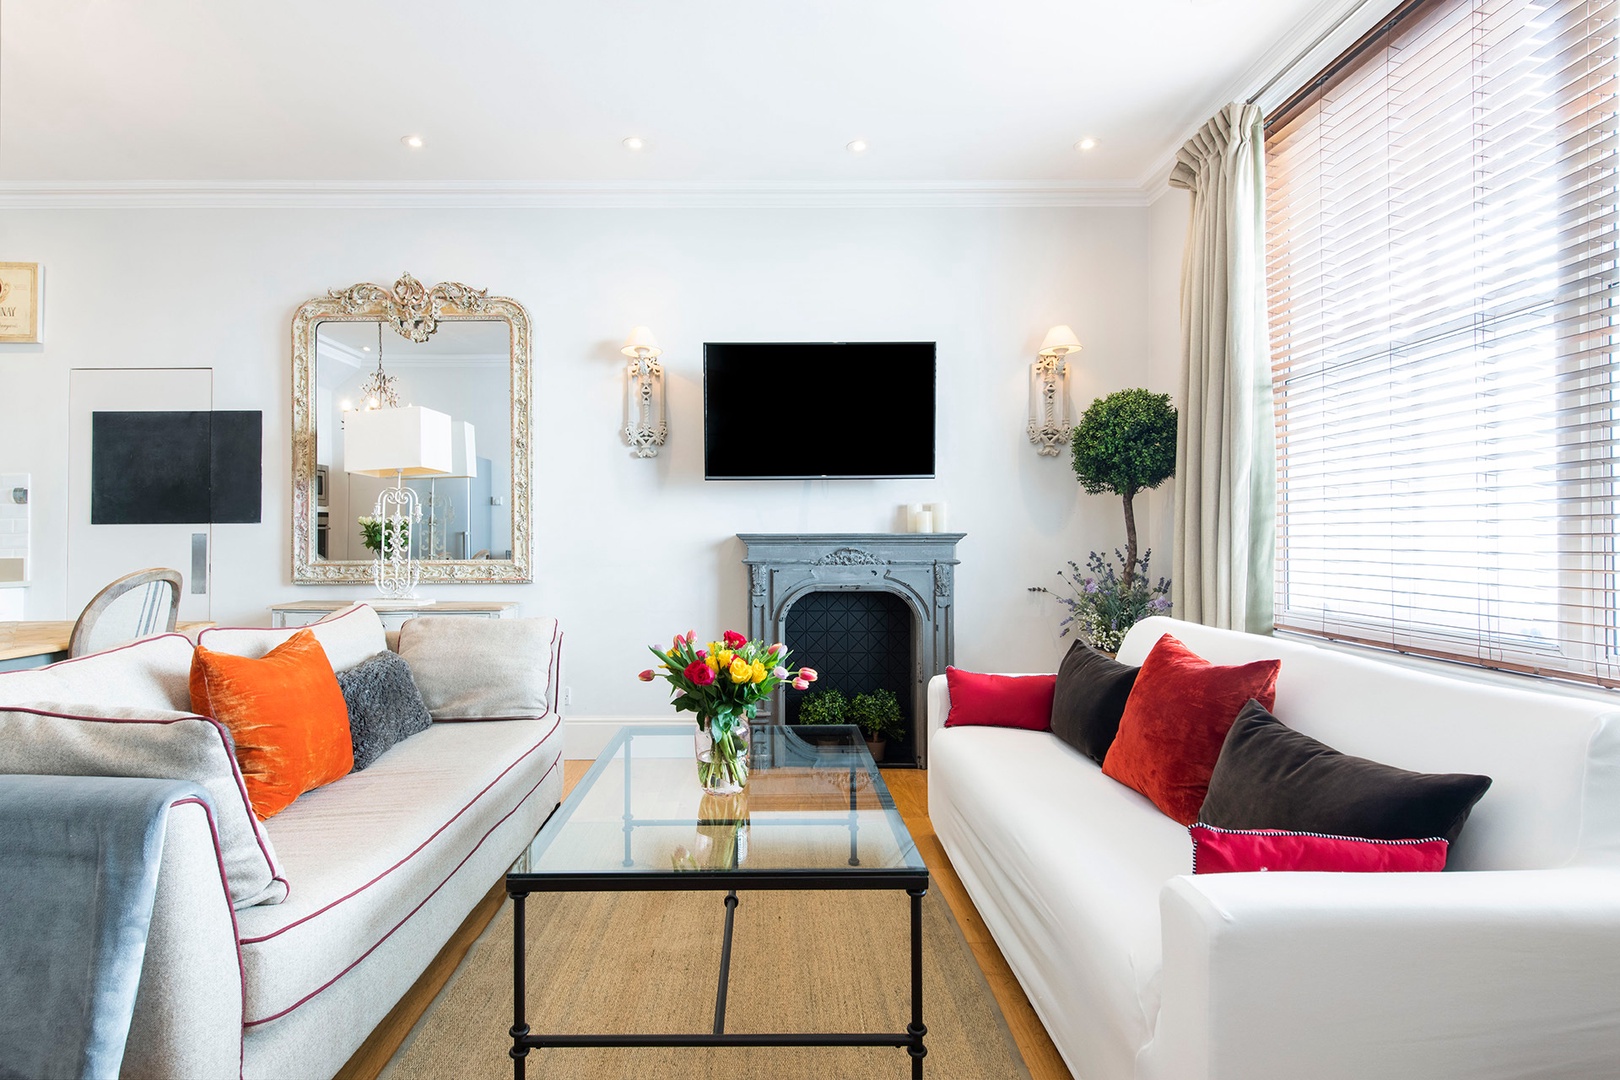 Spend relaxing evenings at home during your stay in London